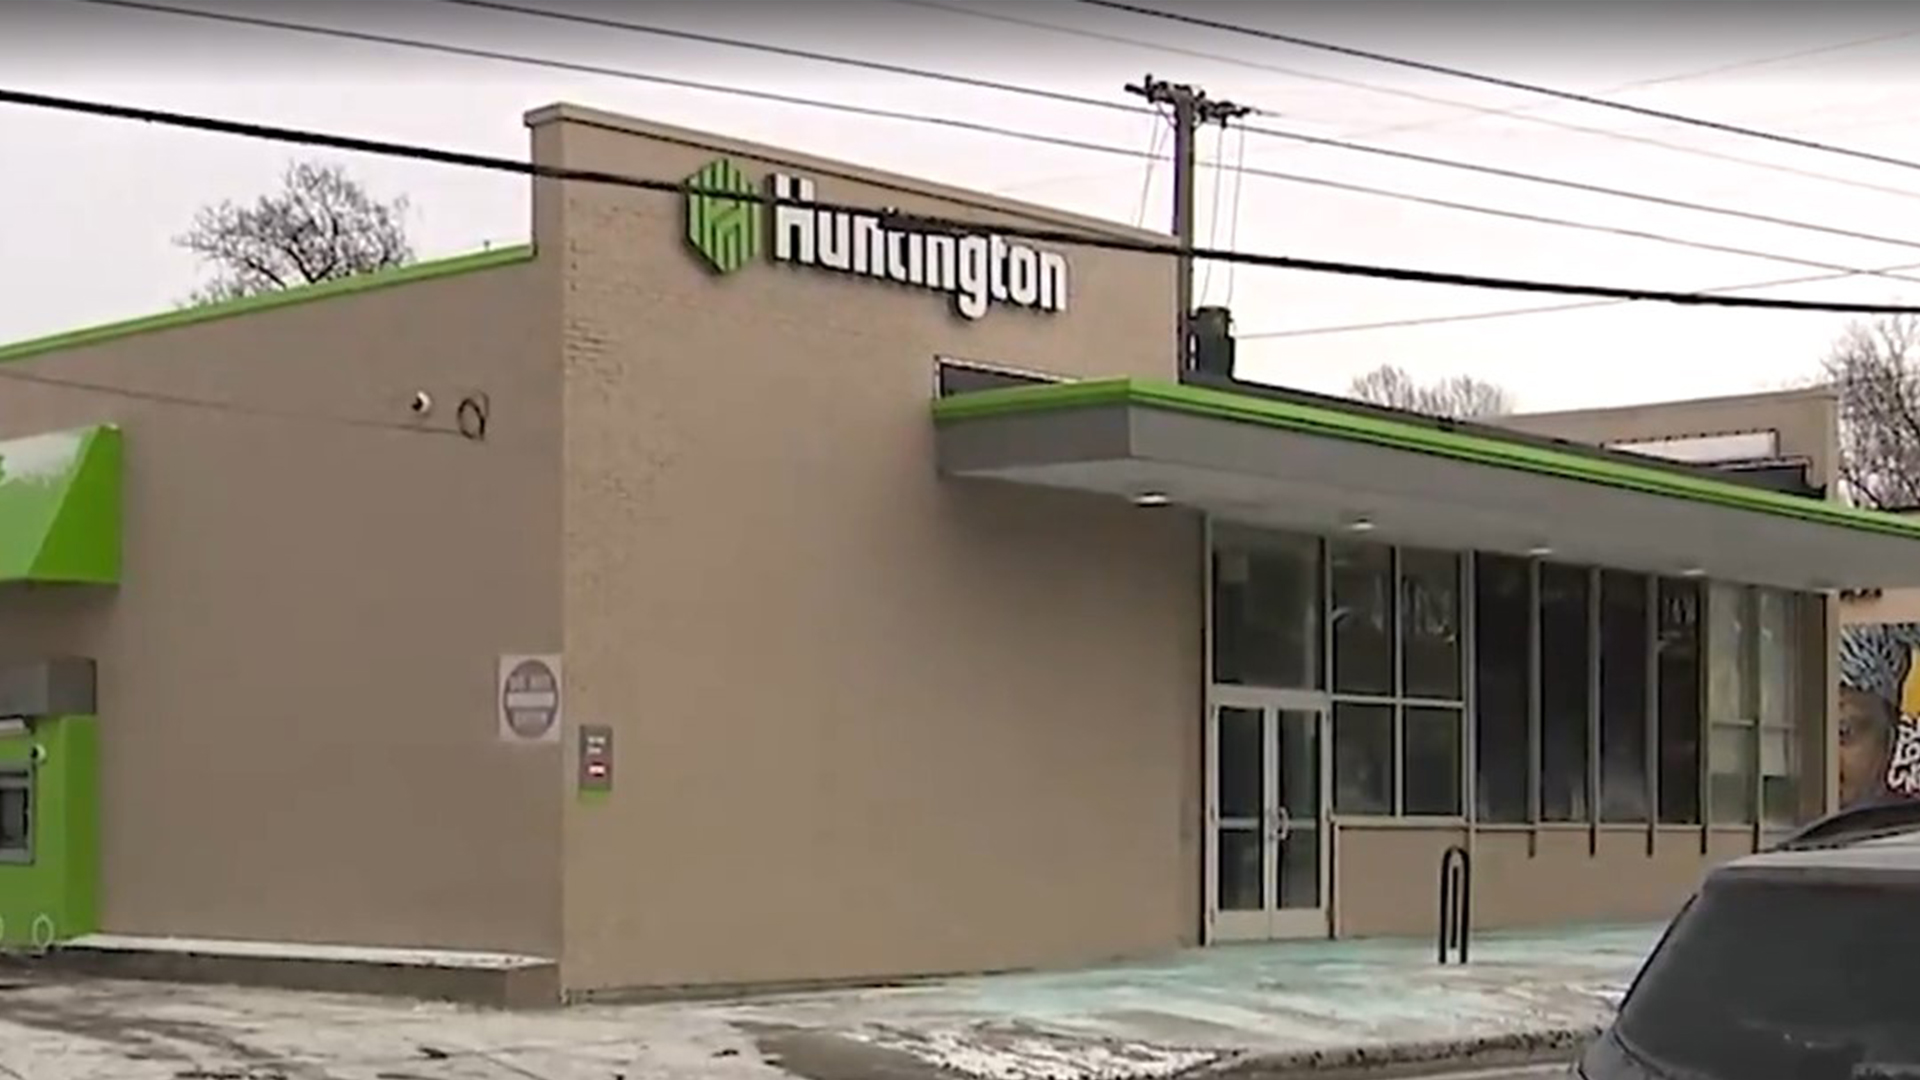 Bank users dealt another blow as final option to access their money is damaged at branch forced to close due to crime [Video]